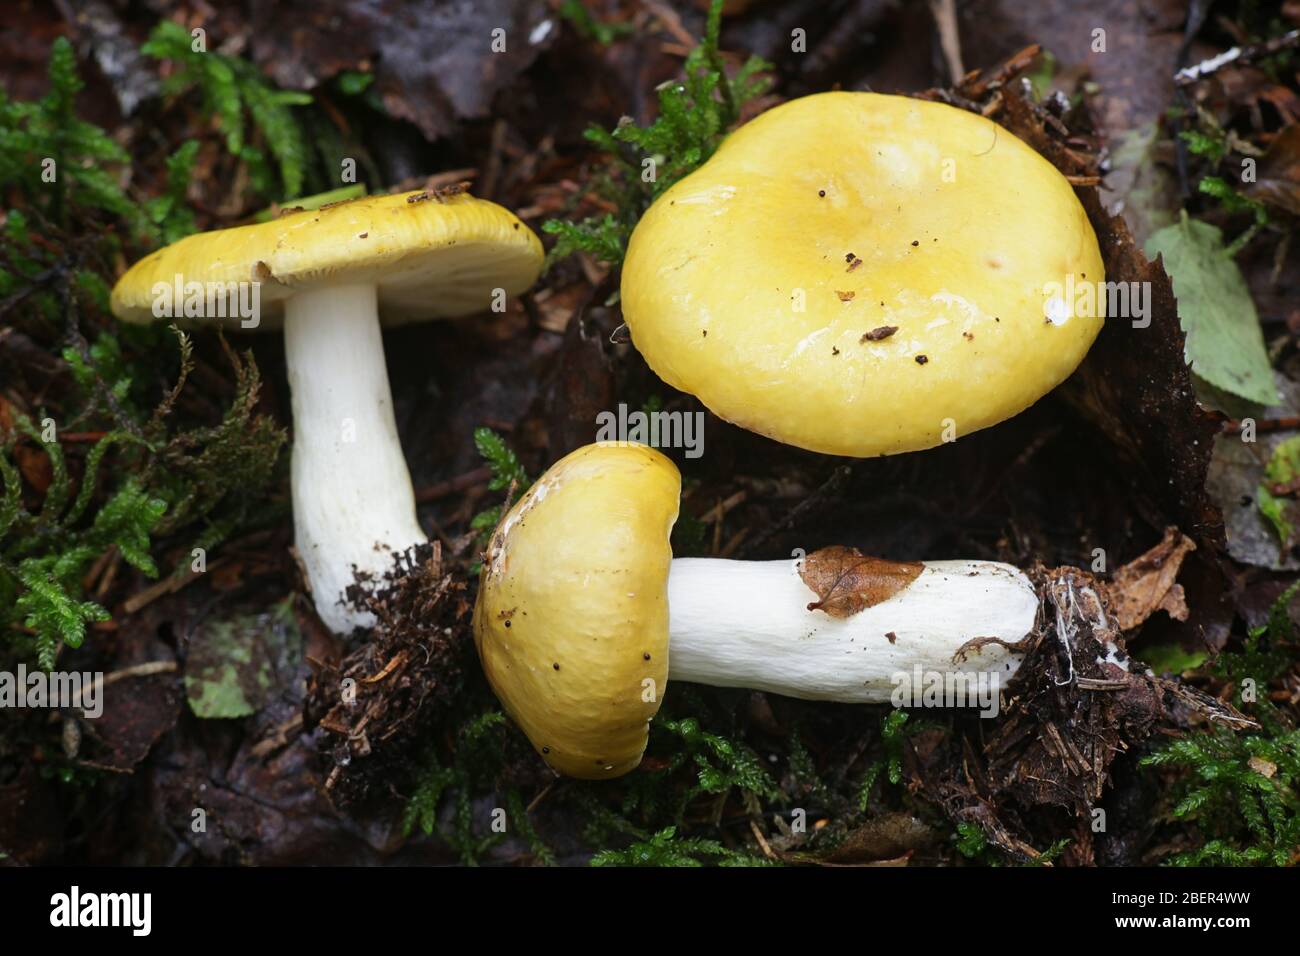 Russula claroflava, known as the yellow swamp russula or yellow swamp brittlegill, wild edible mushroom from Finland Stock Photo